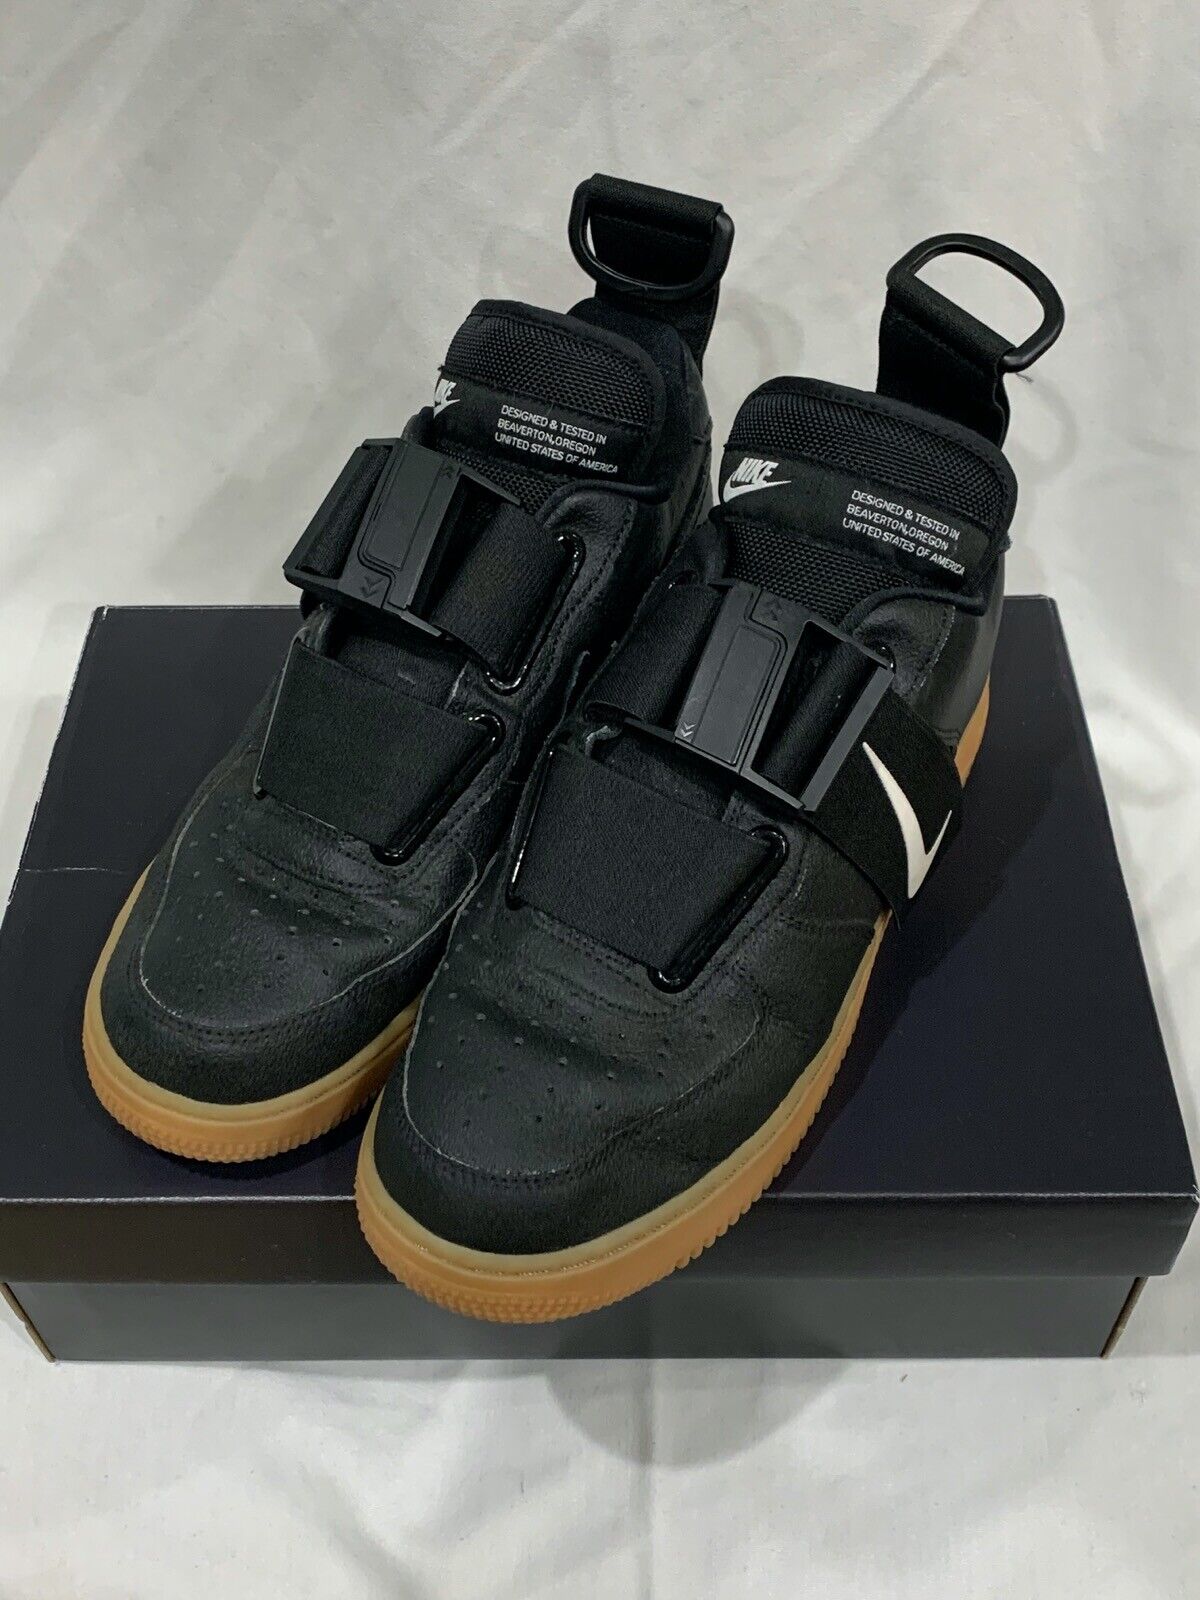 The Strapped Nike Air Force 1 Utility Is Coming Soon In Black And Gum 